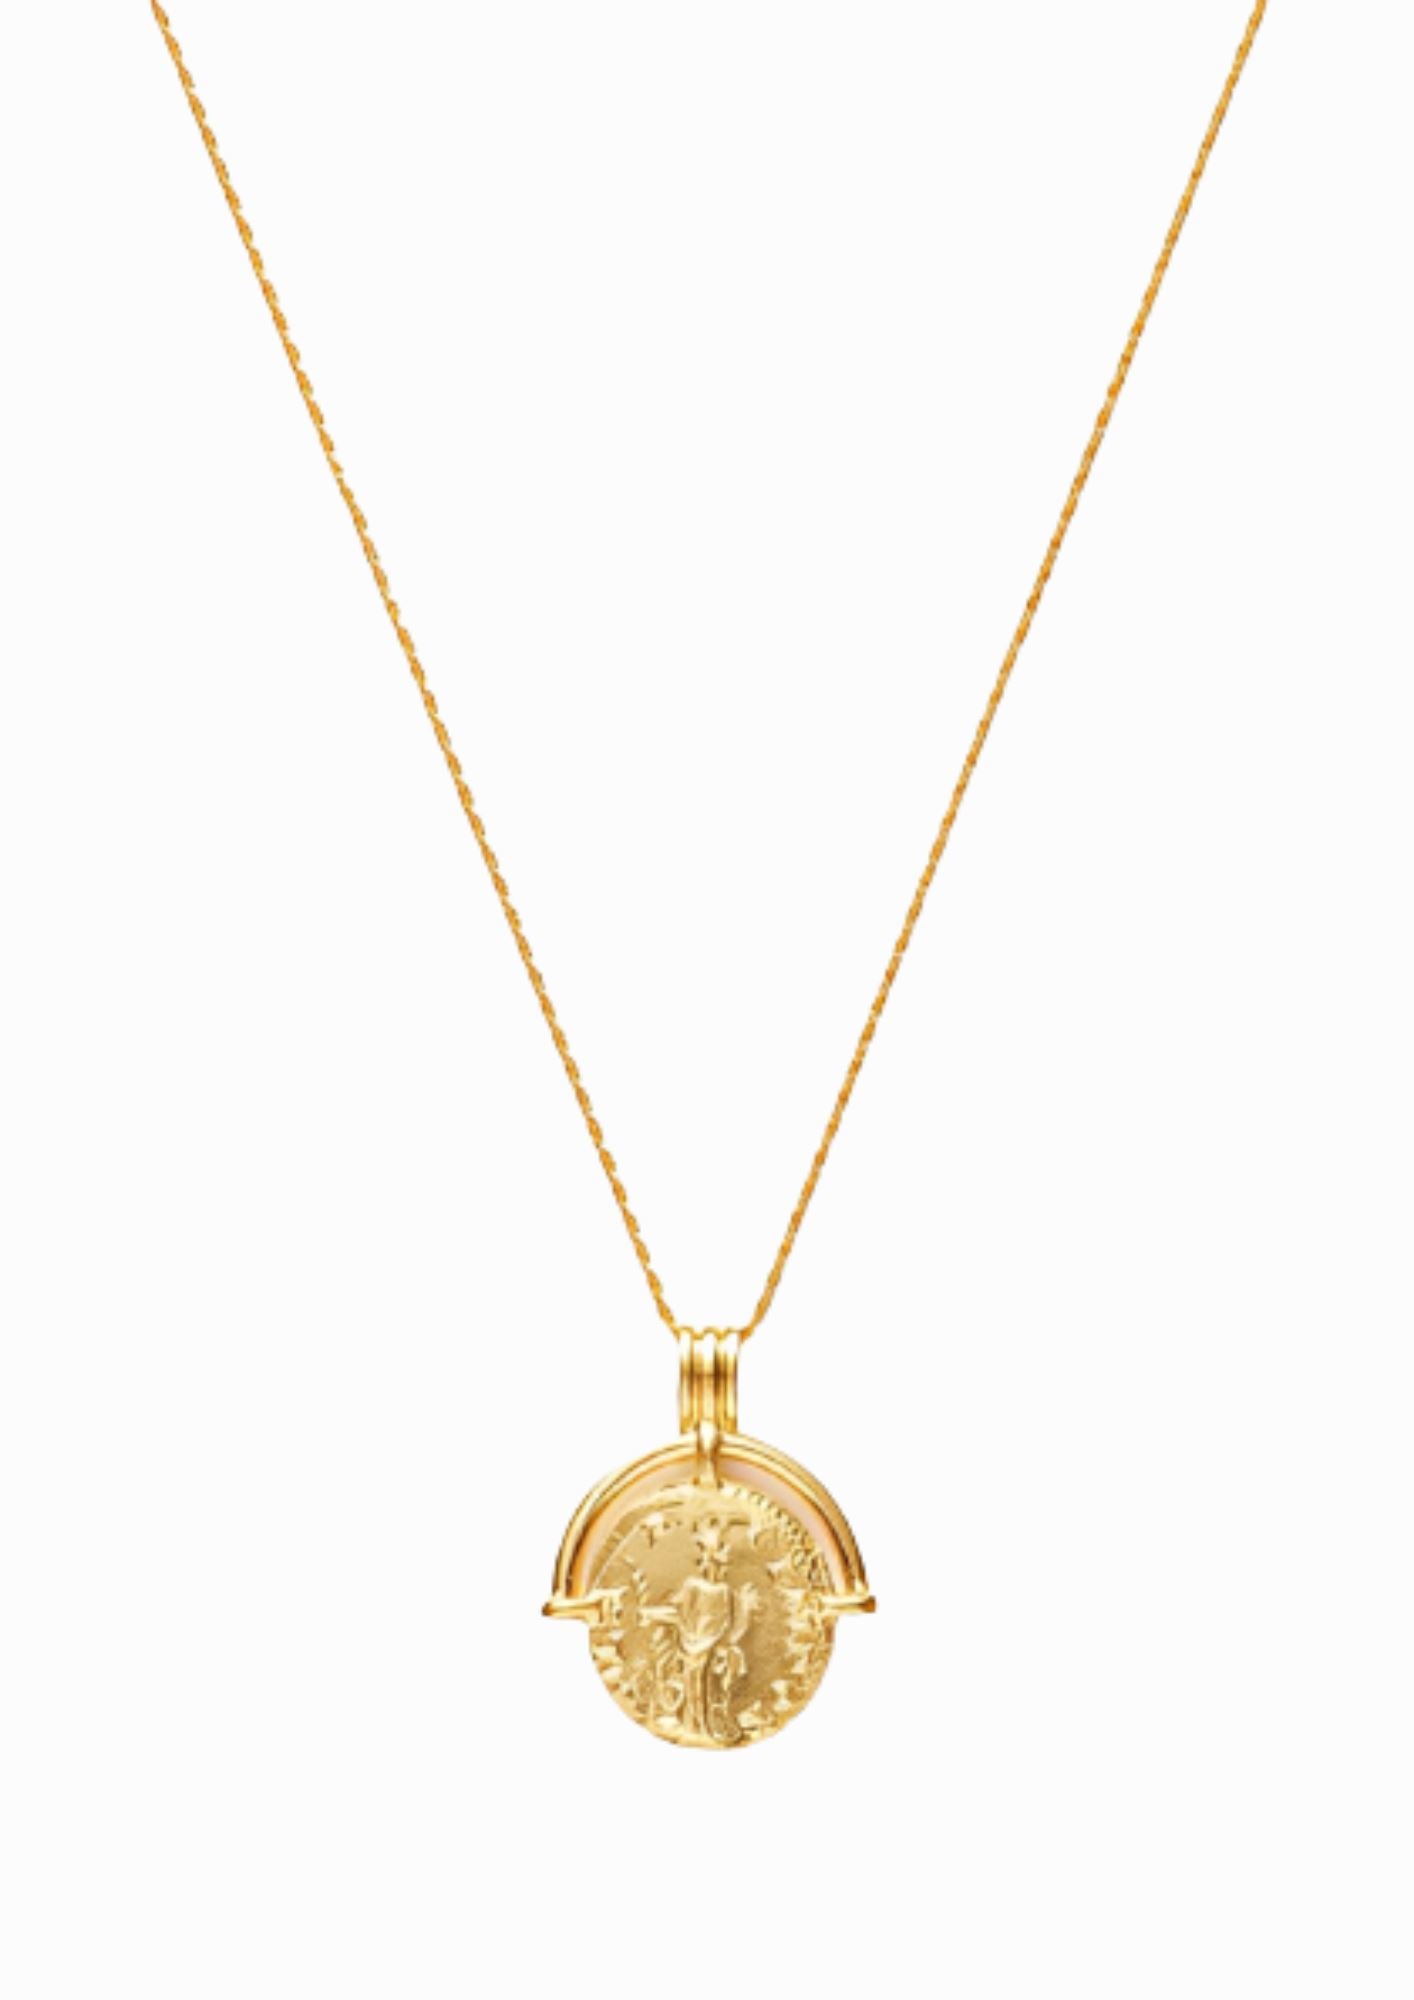 ROMAN COIN NECKLACE neck Yubama Jewelry Online Store - The Elegant Designs of Gold and Silver ! 